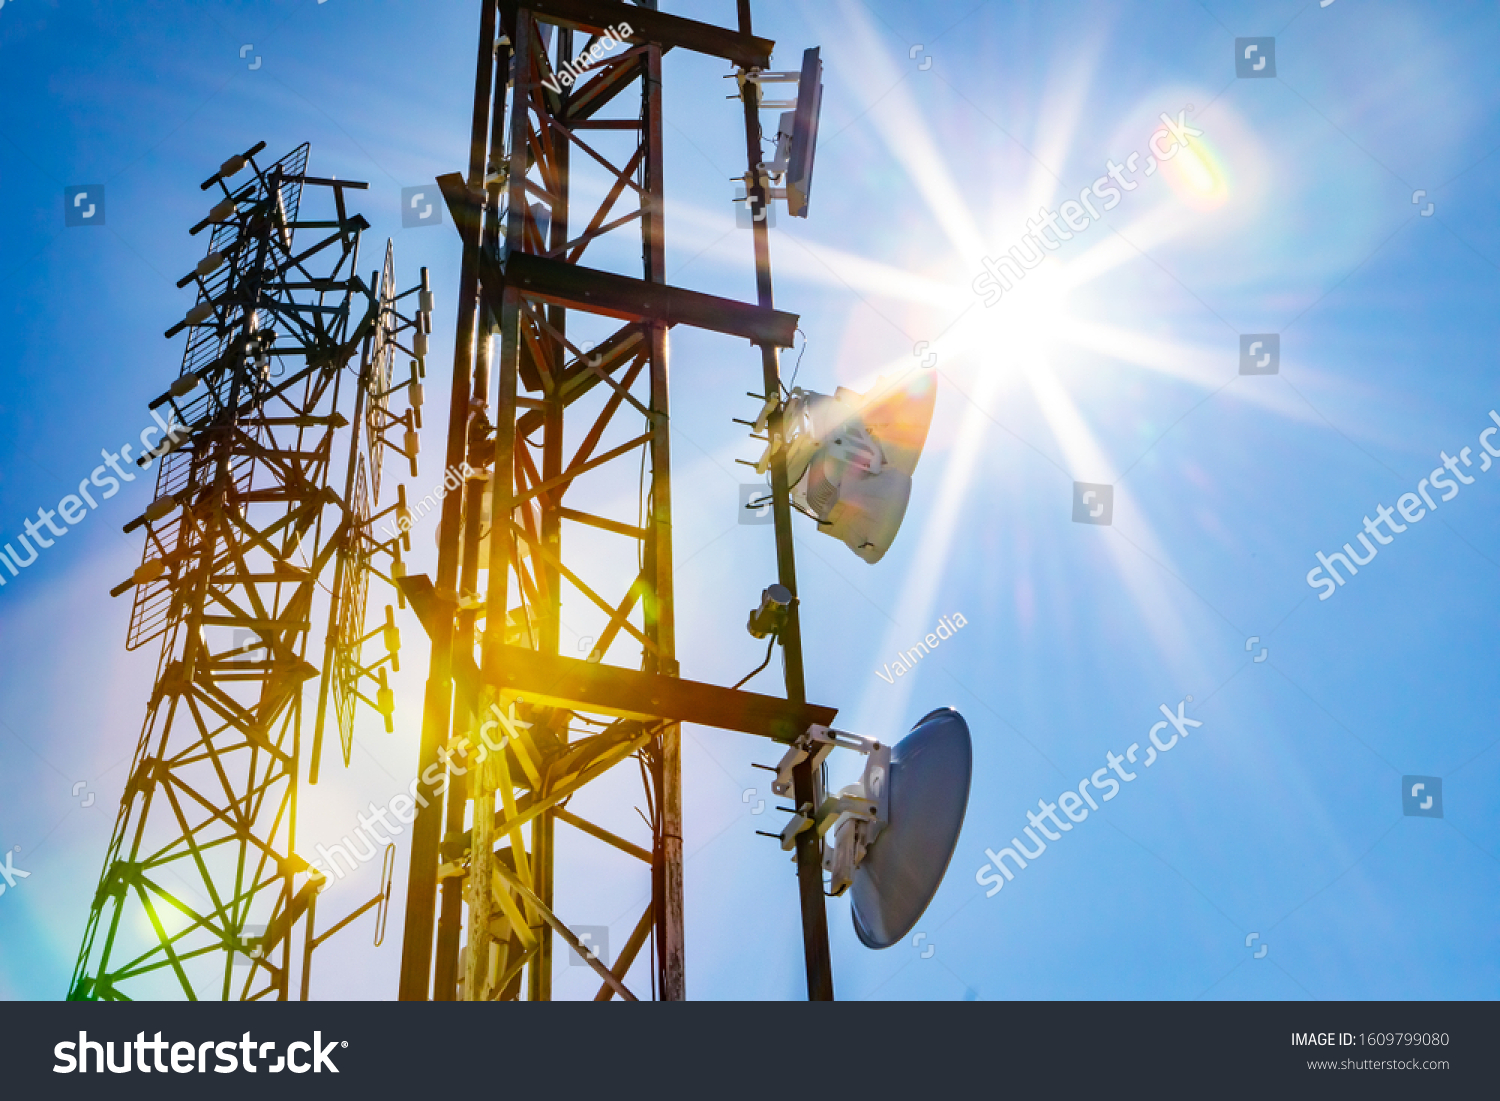 Electromagnetic radiation under the hot summer sun, colorful radioactive pollution concept with two cellular network towers and copy space to right #1609799080